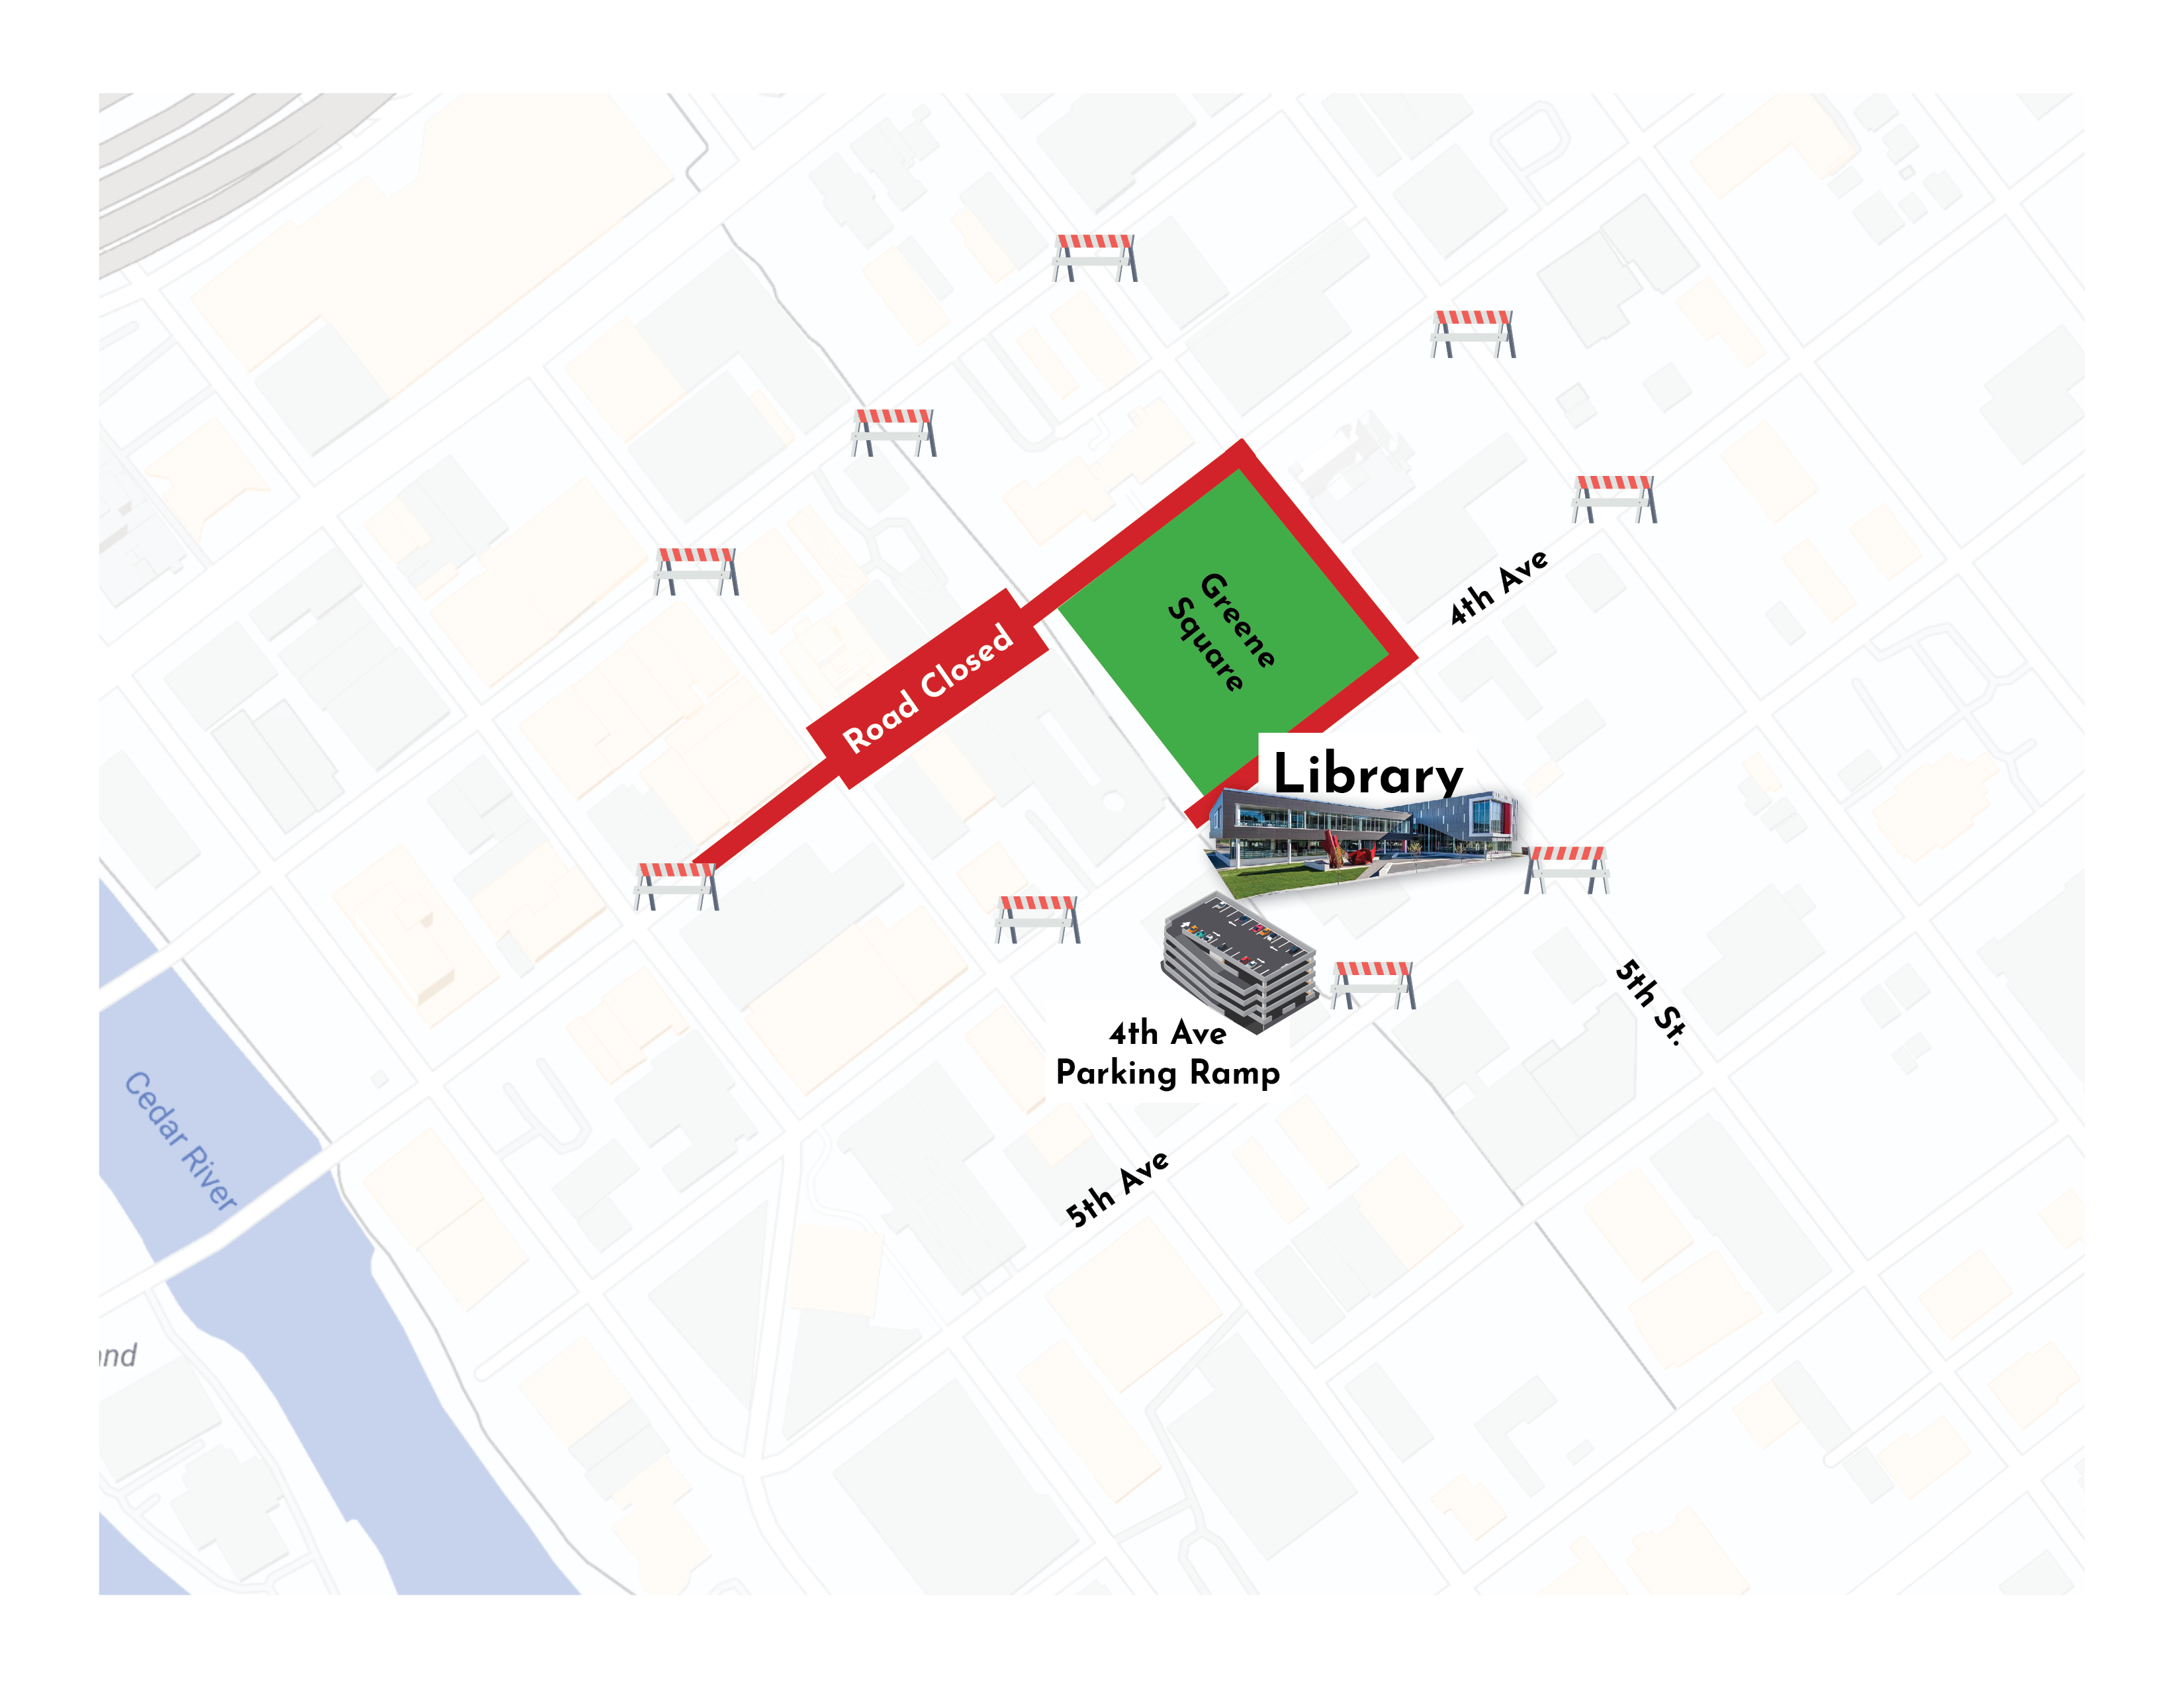 A graphic shows a map marking road closures around the library.